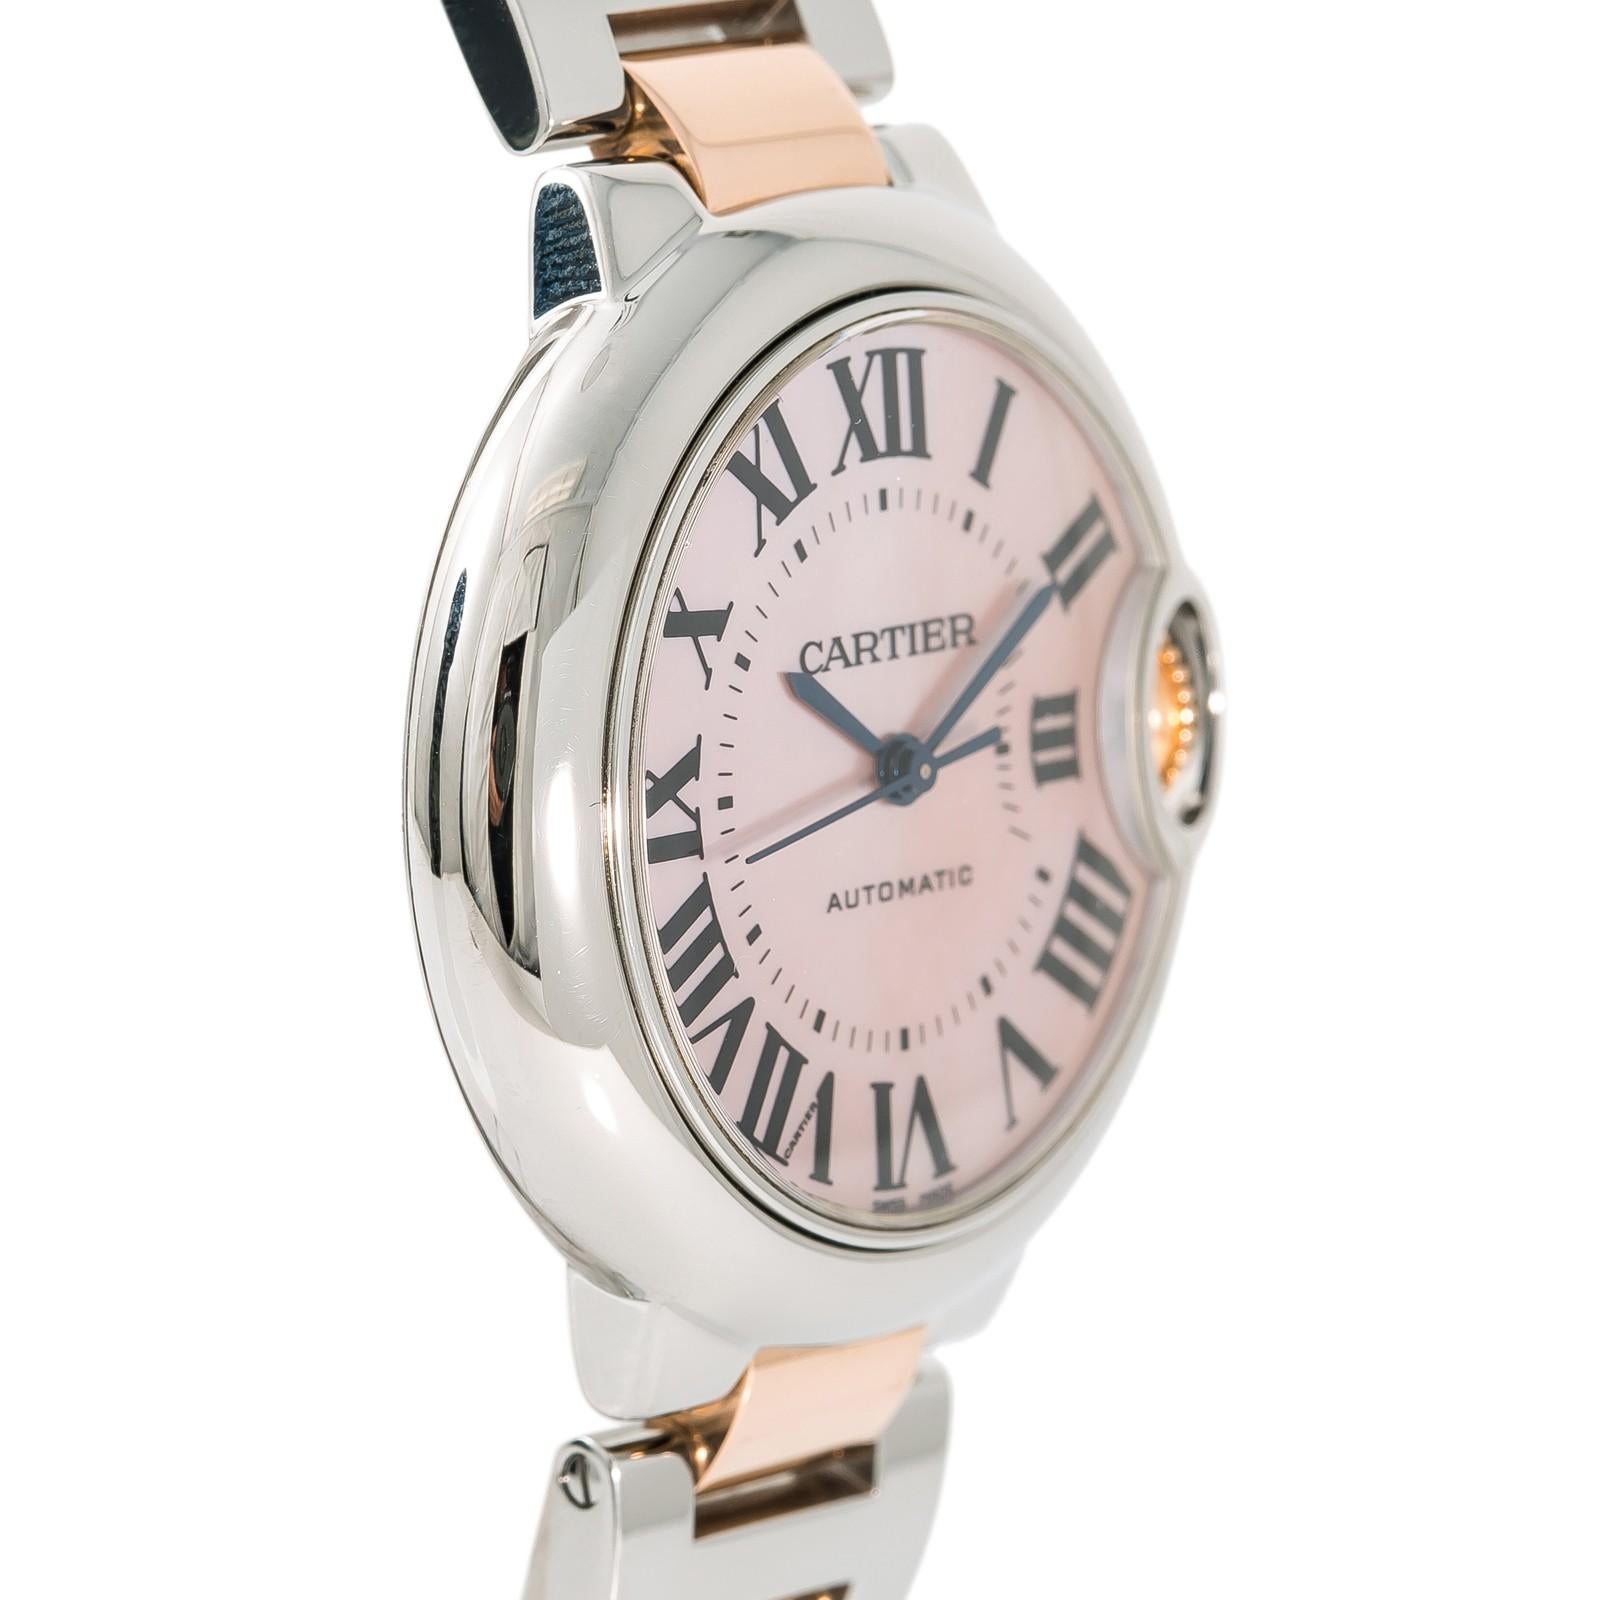 Cartier Ballon Bleu7020, Silver Dial Certified Authentic In Excellent Condition For Sale In Miami, FL